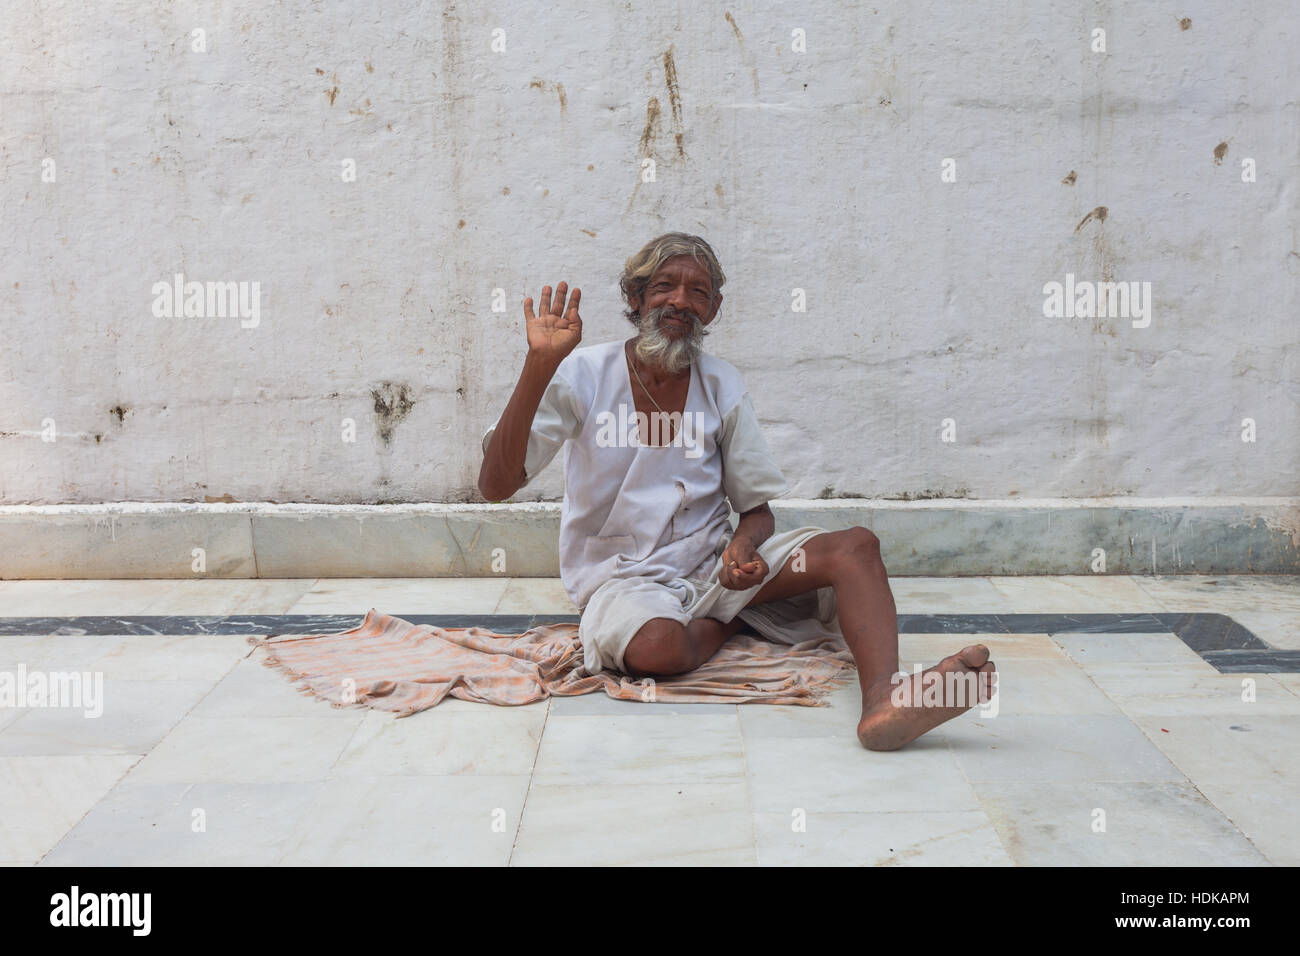 Indian man showing friendly gesture, sitting on floor, Rajasthan, India Stock Photo